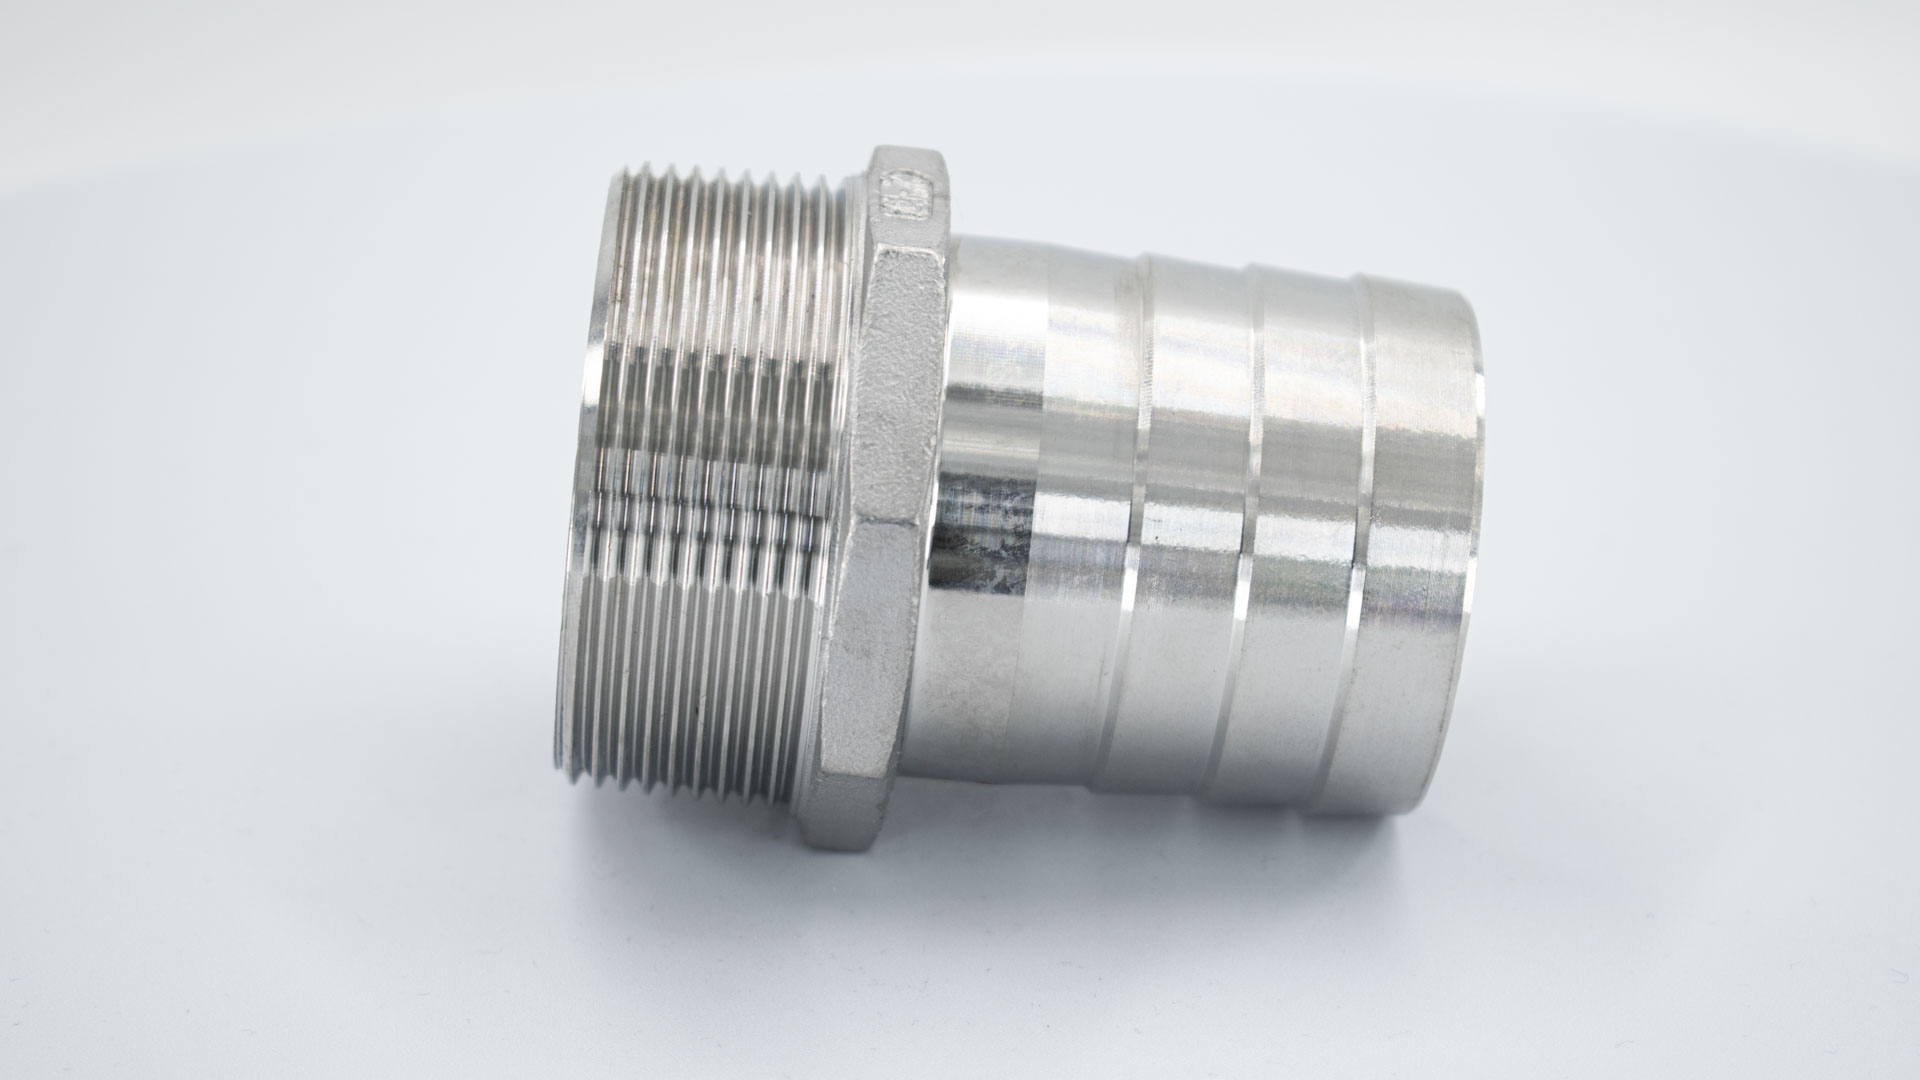 Stainless steel hose nozzle with male thread